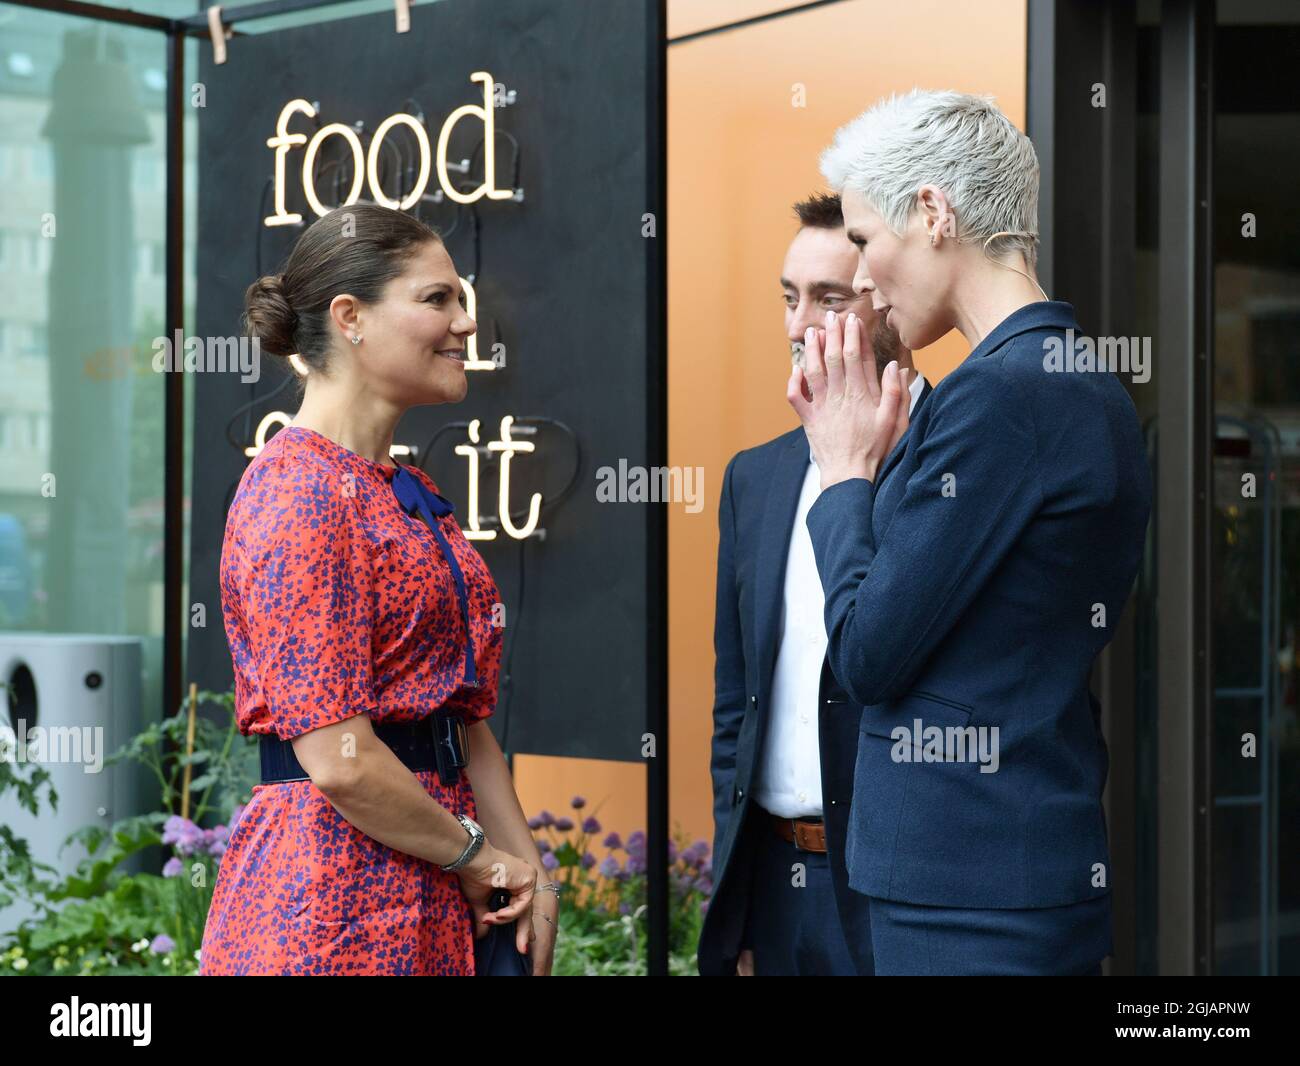 STOCKHOLM 20170612 Crown Princess Victoria is seen welcomed by CEO Jonathan Farnell and Gunhild Stordalen to the EAT Forum in Stockholm, Sweden on Monday. The EAT foundation is founded by Gunhild Stordalen and is aiming to reform the global food system. Foto: Henrik Montgomery / TT kod 10060  Stock Photo